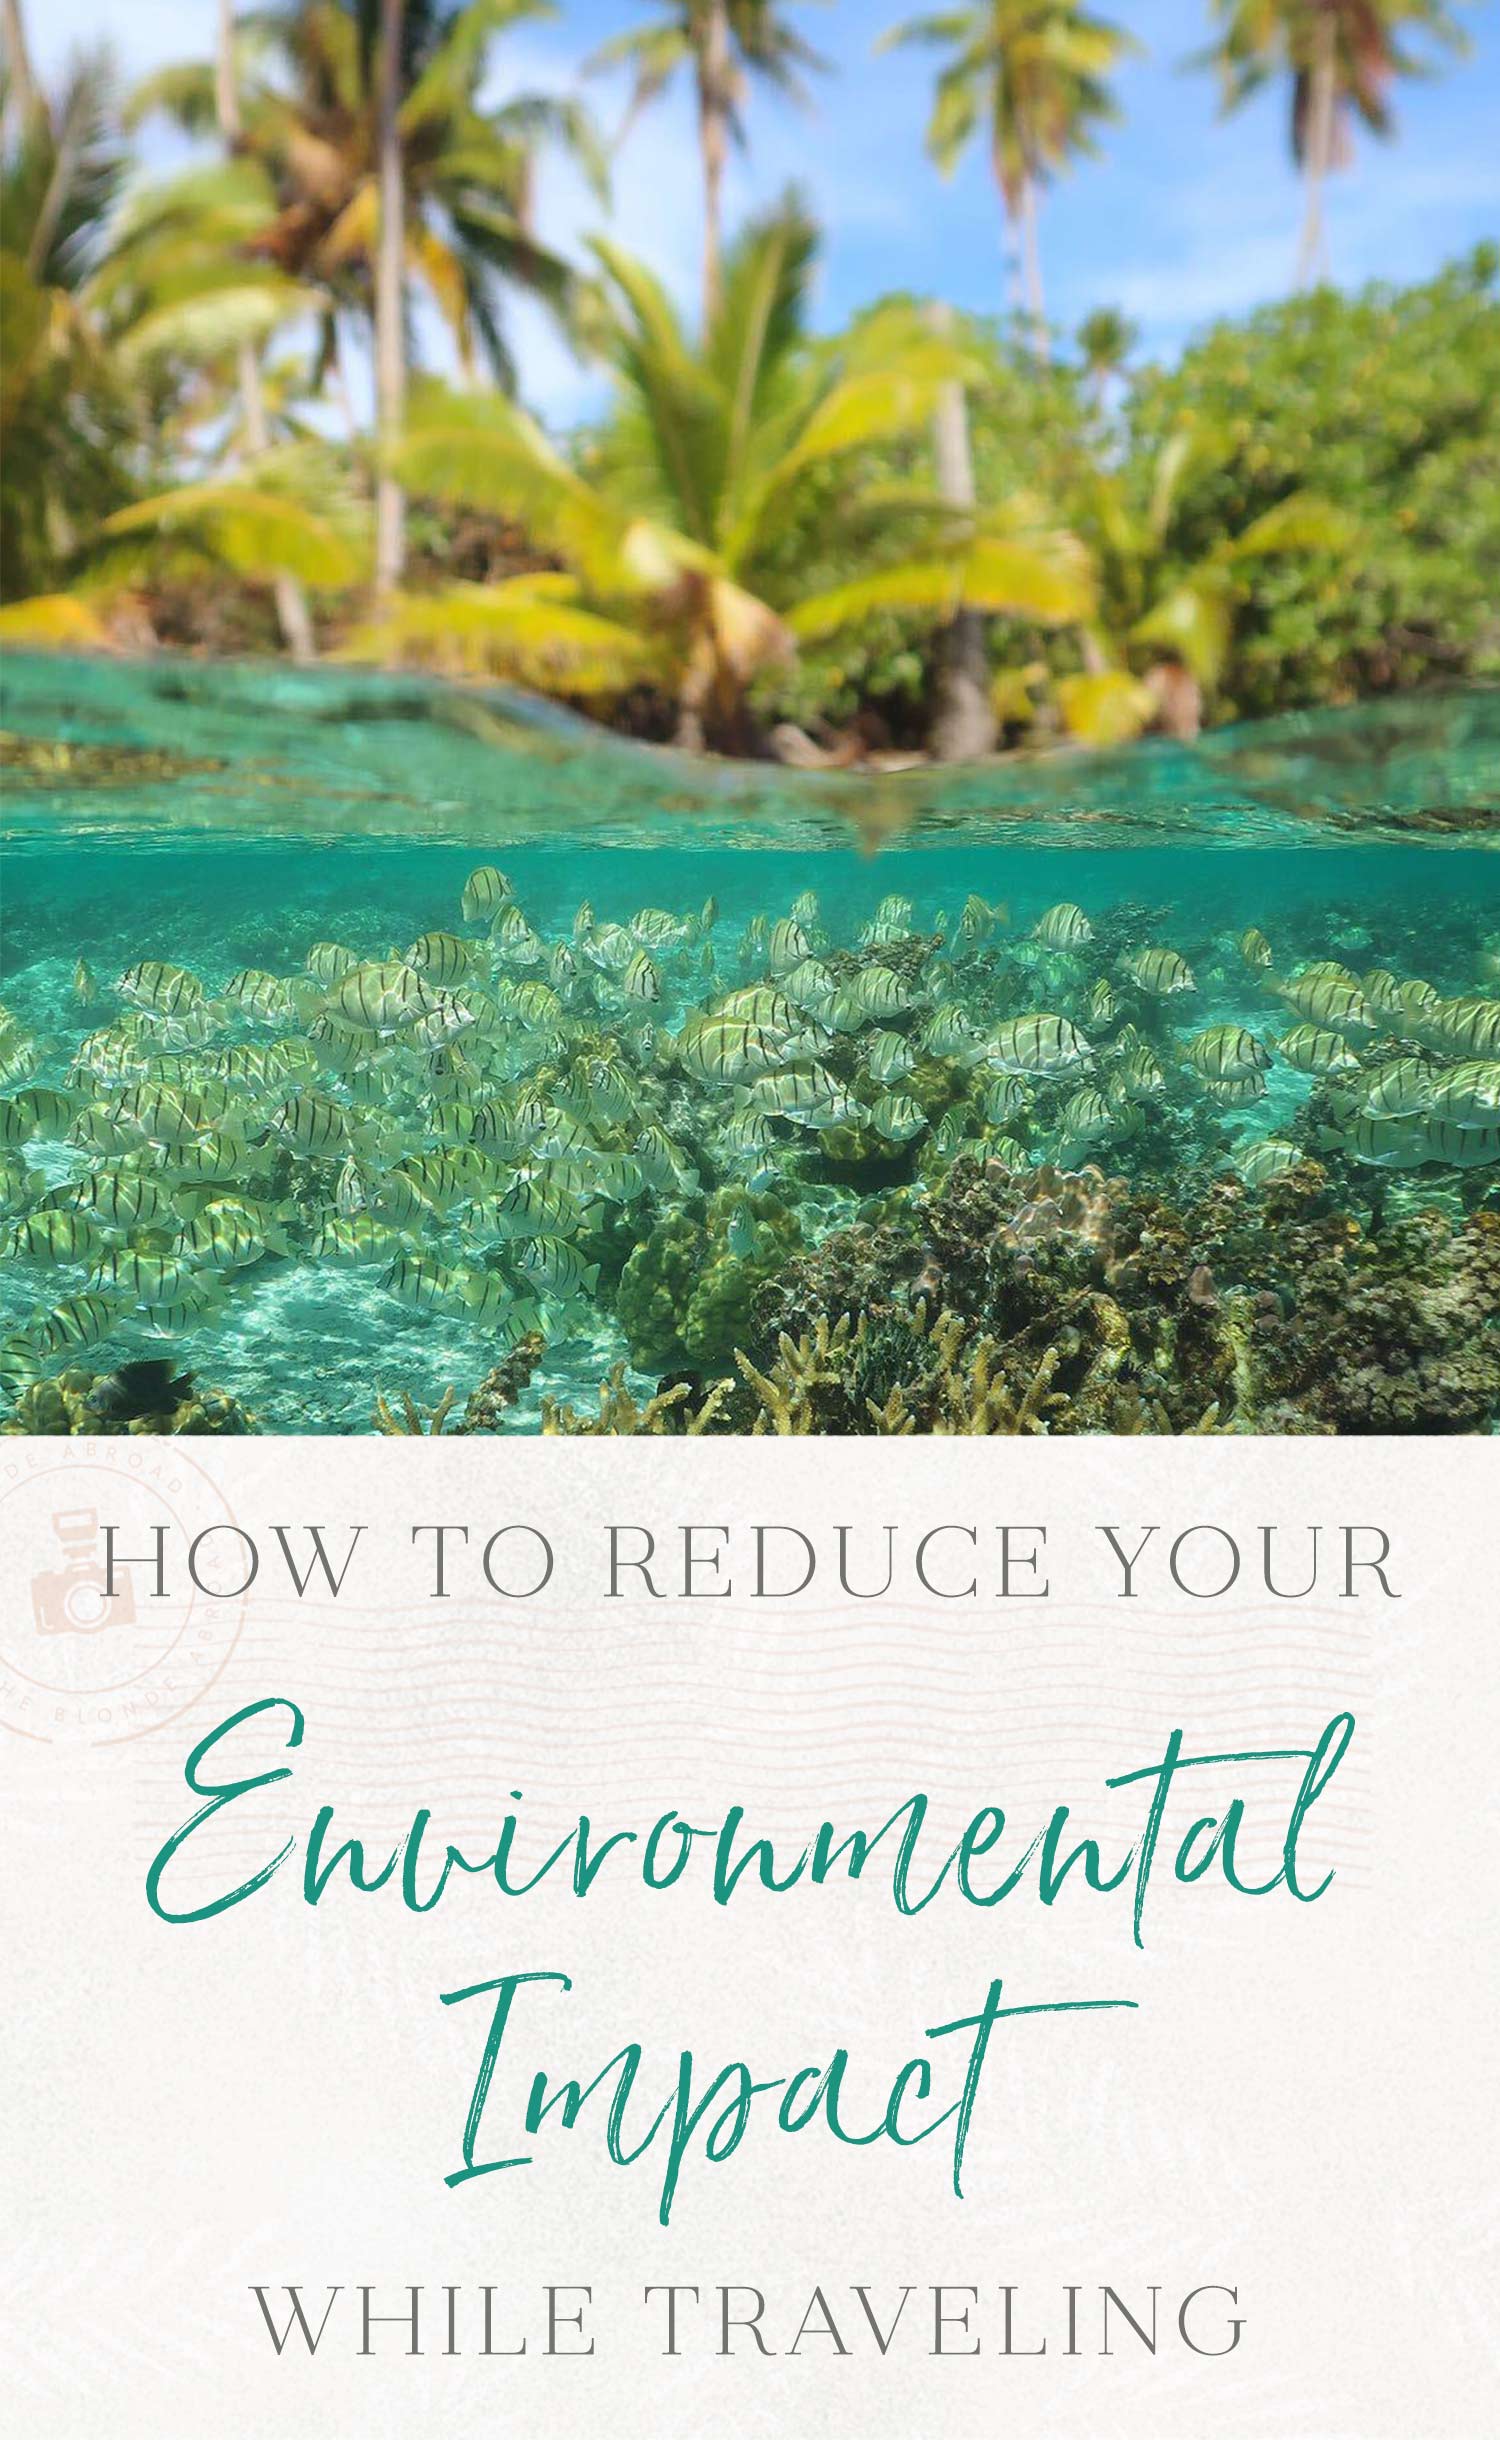 How to Reduce Your Environmental Impact While Traveling